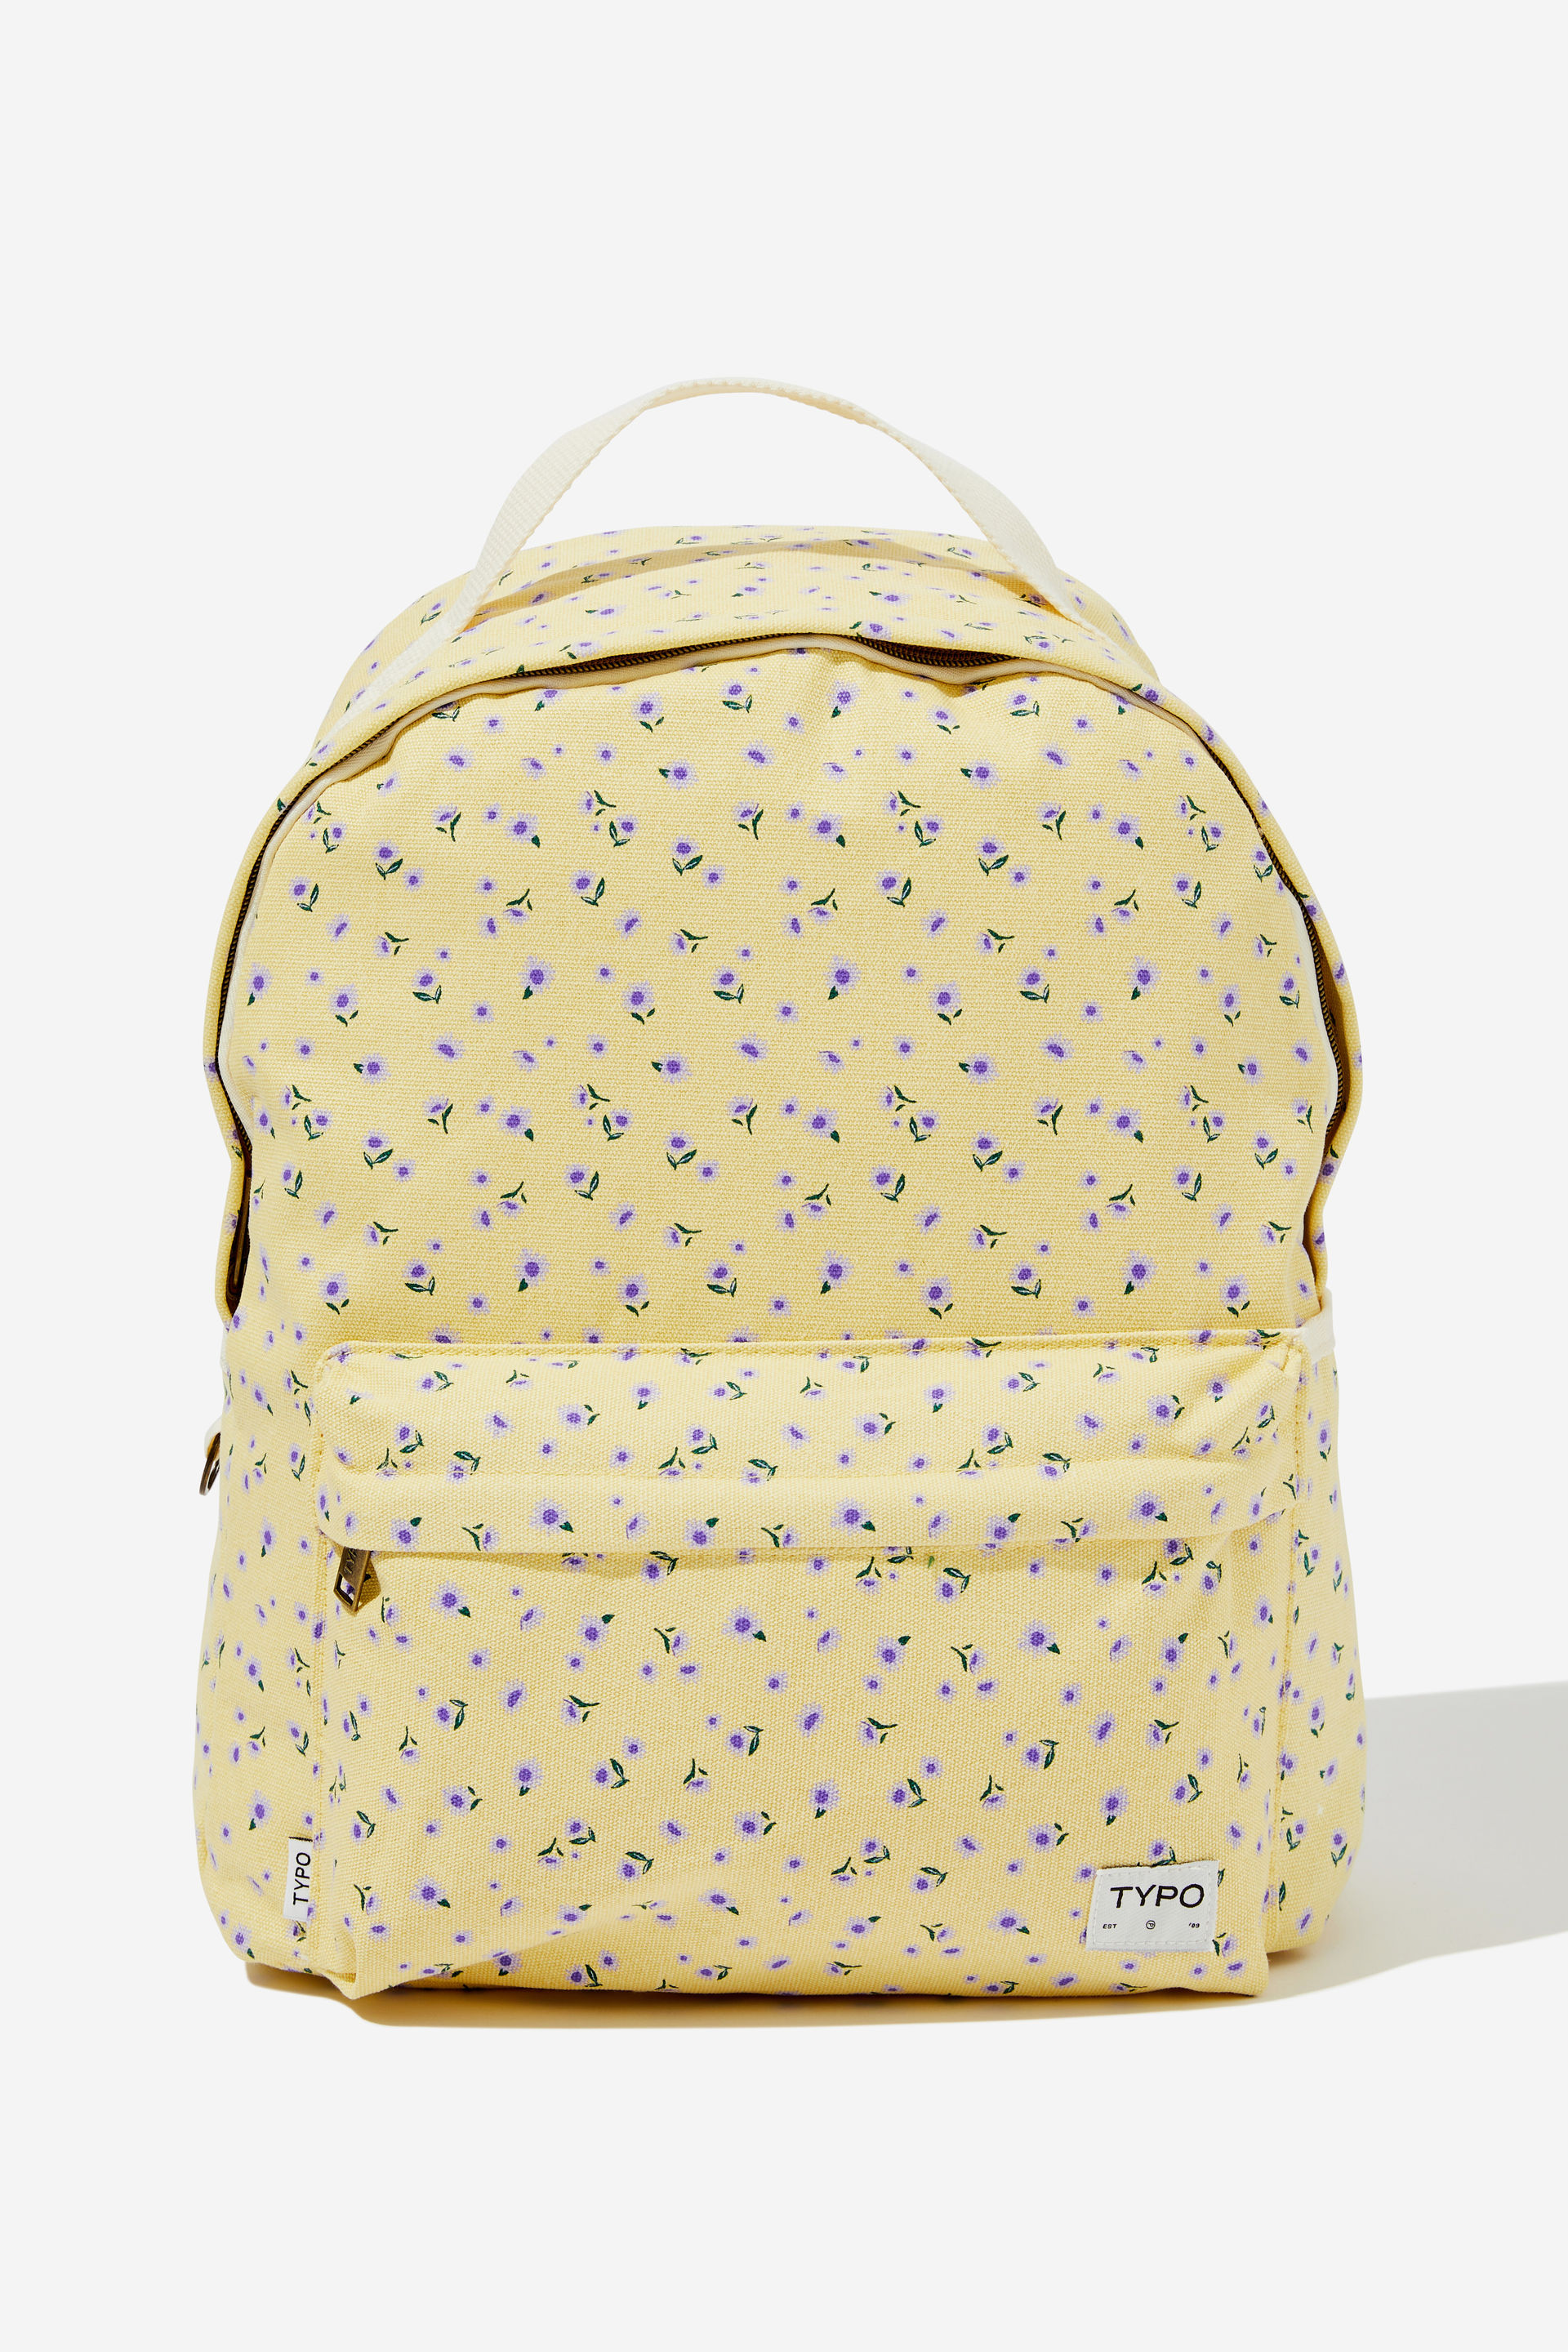 Typo - Alumni Backpack - Daisy ditsy / butter